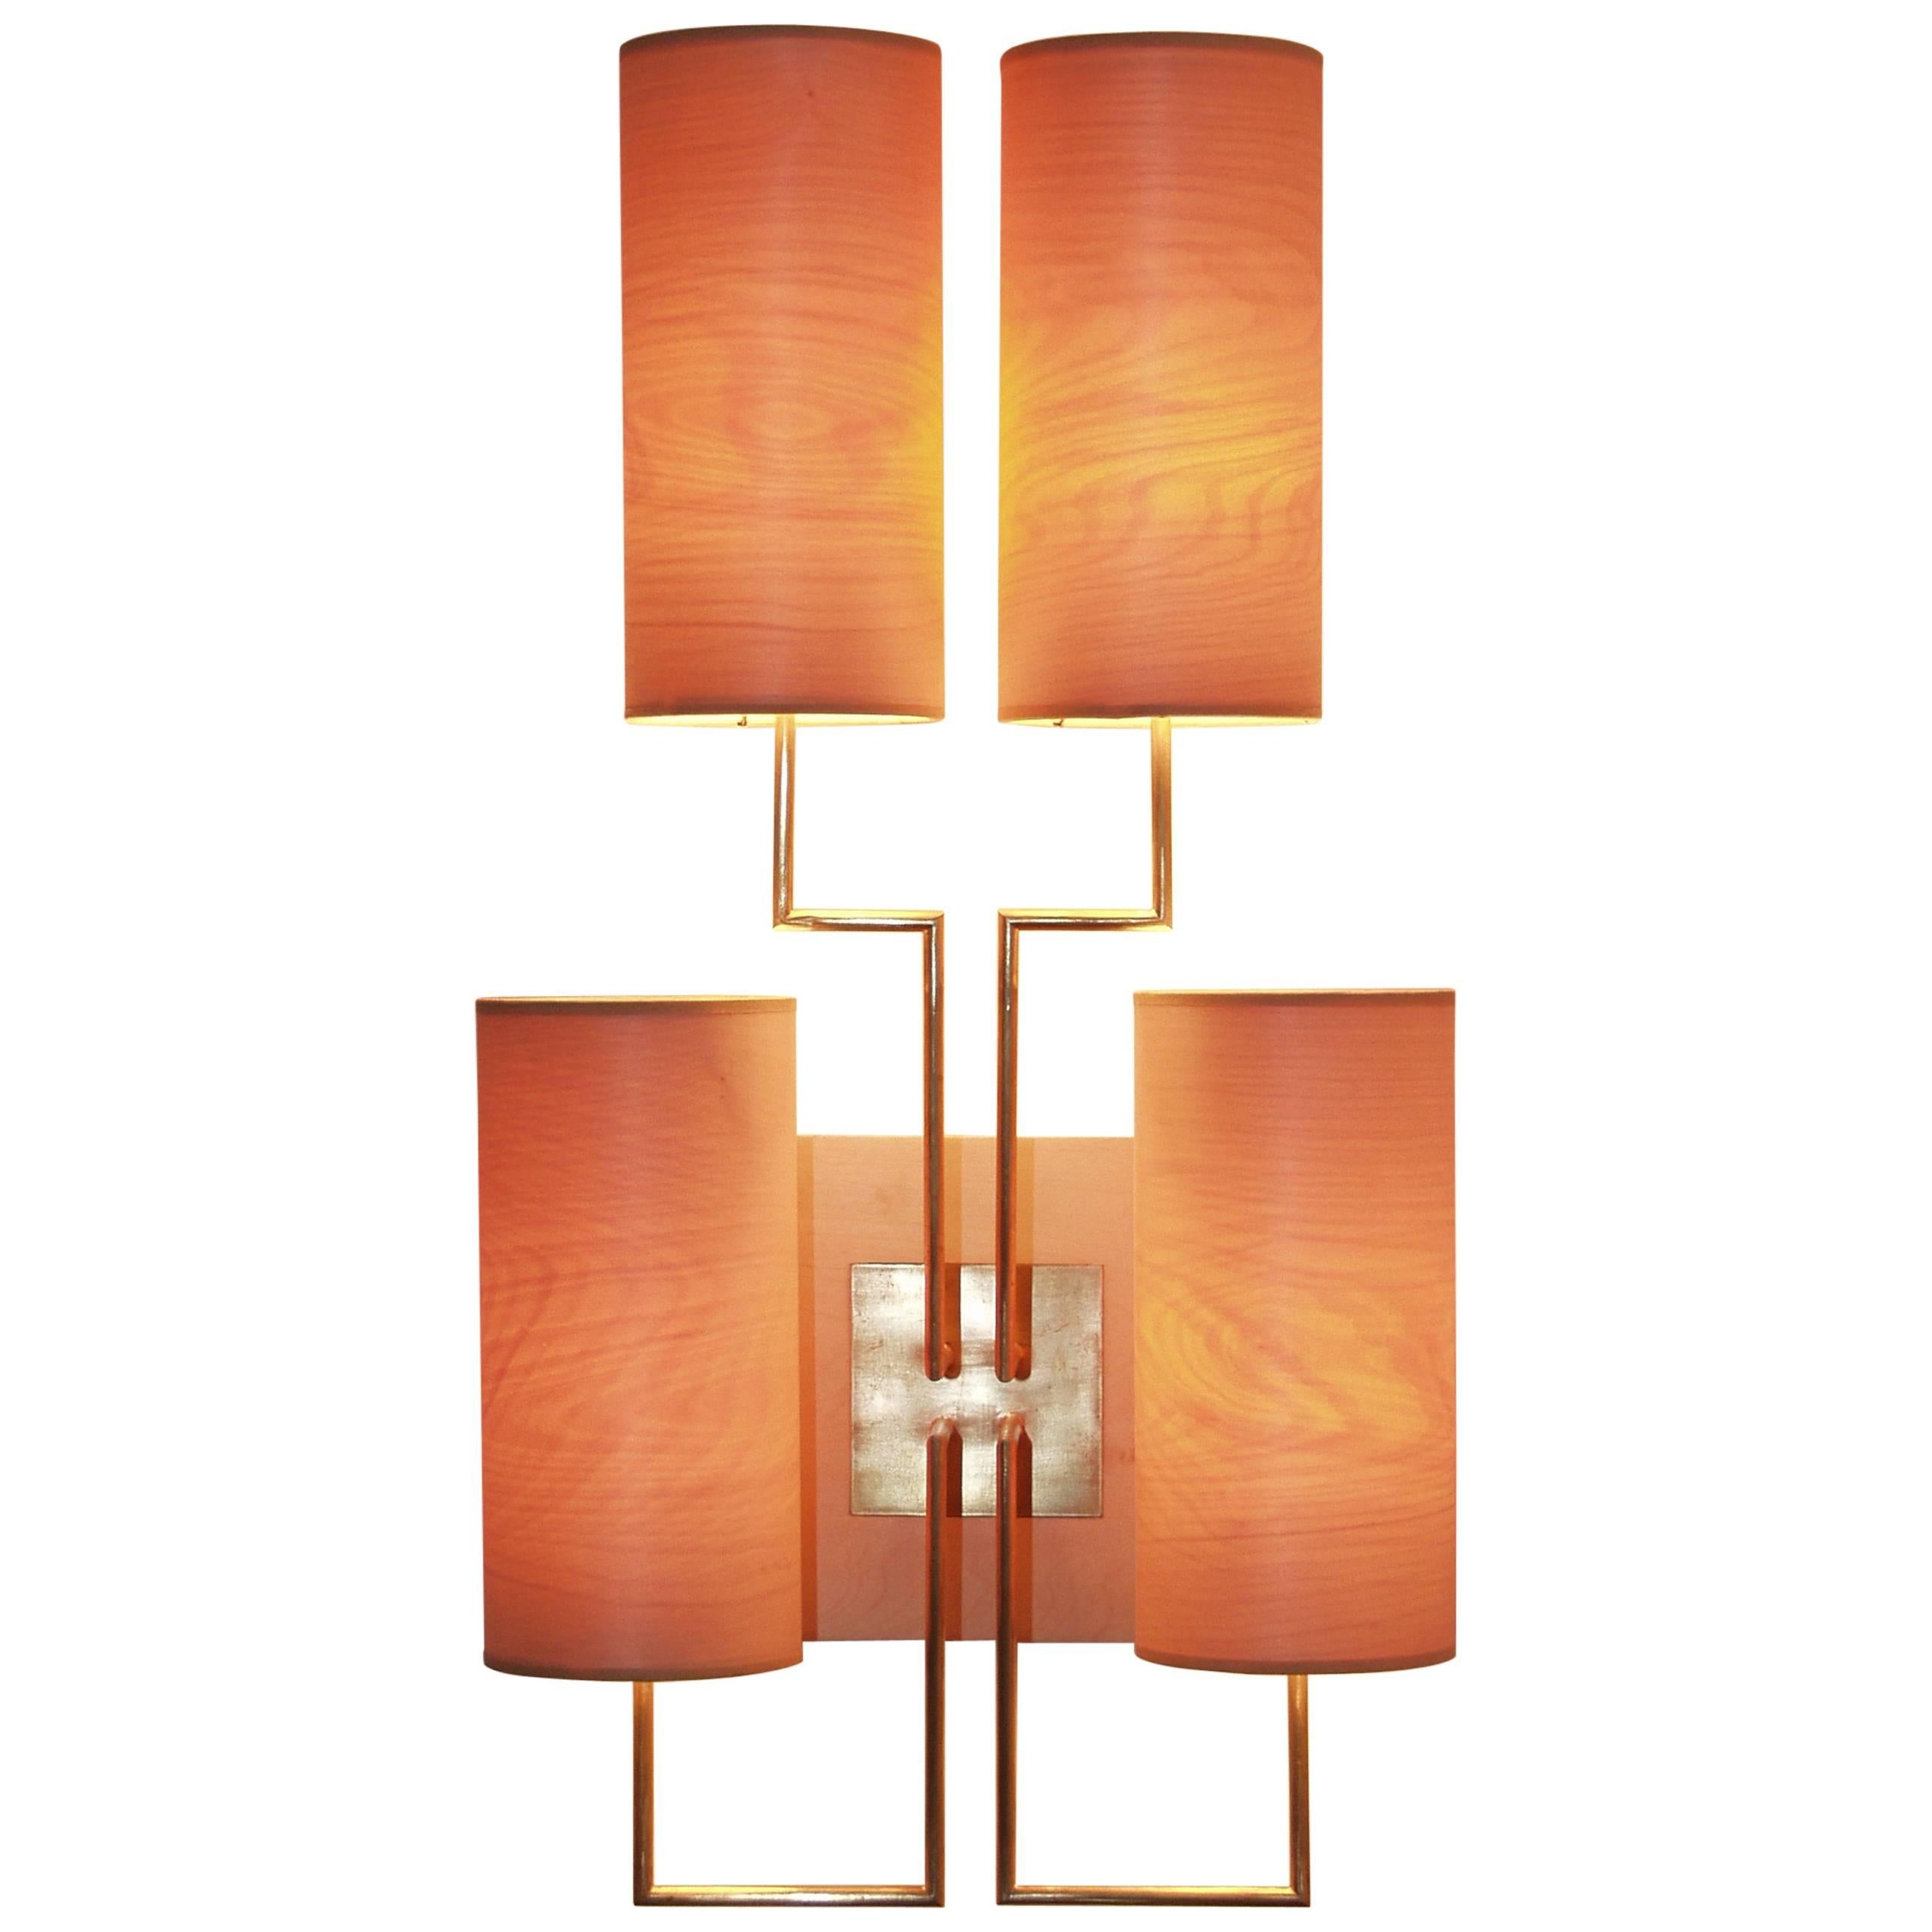 Wall Lamp Sconce “Tige4” Gold Bronze Patina, Wooden Lampshades by Aymeric Lefort